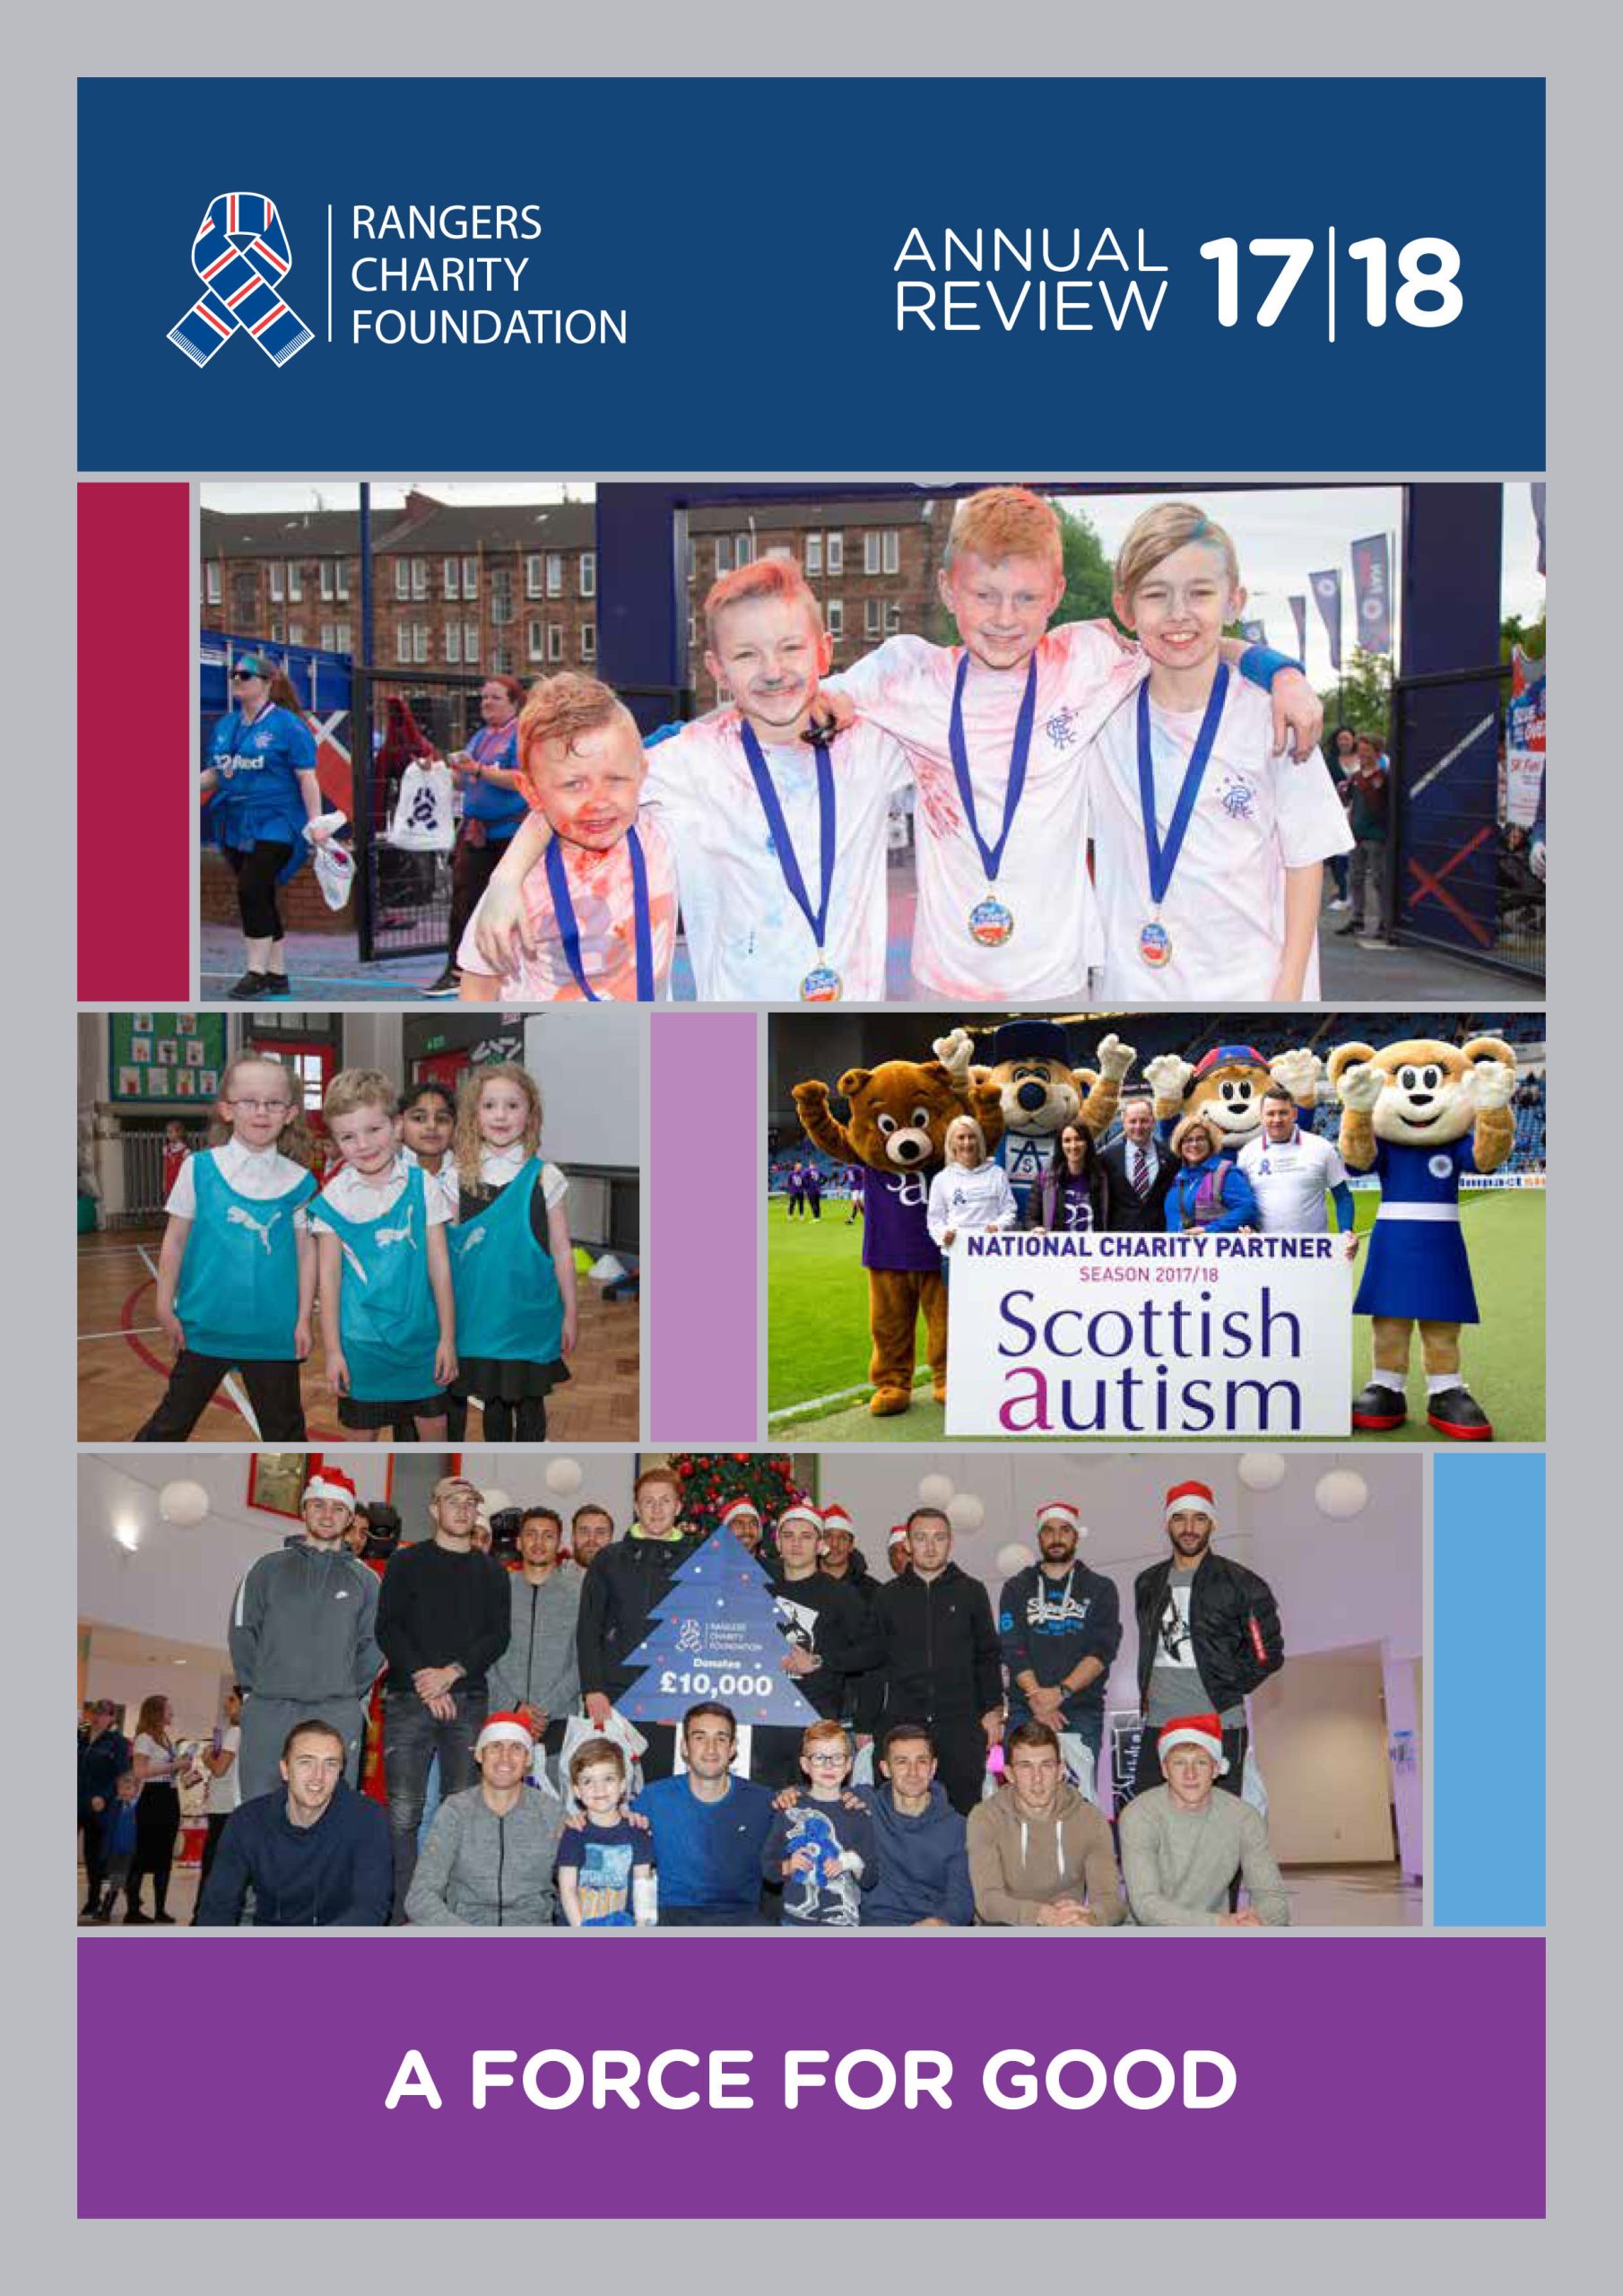 A cover with images for the 2017/18 Annual Review